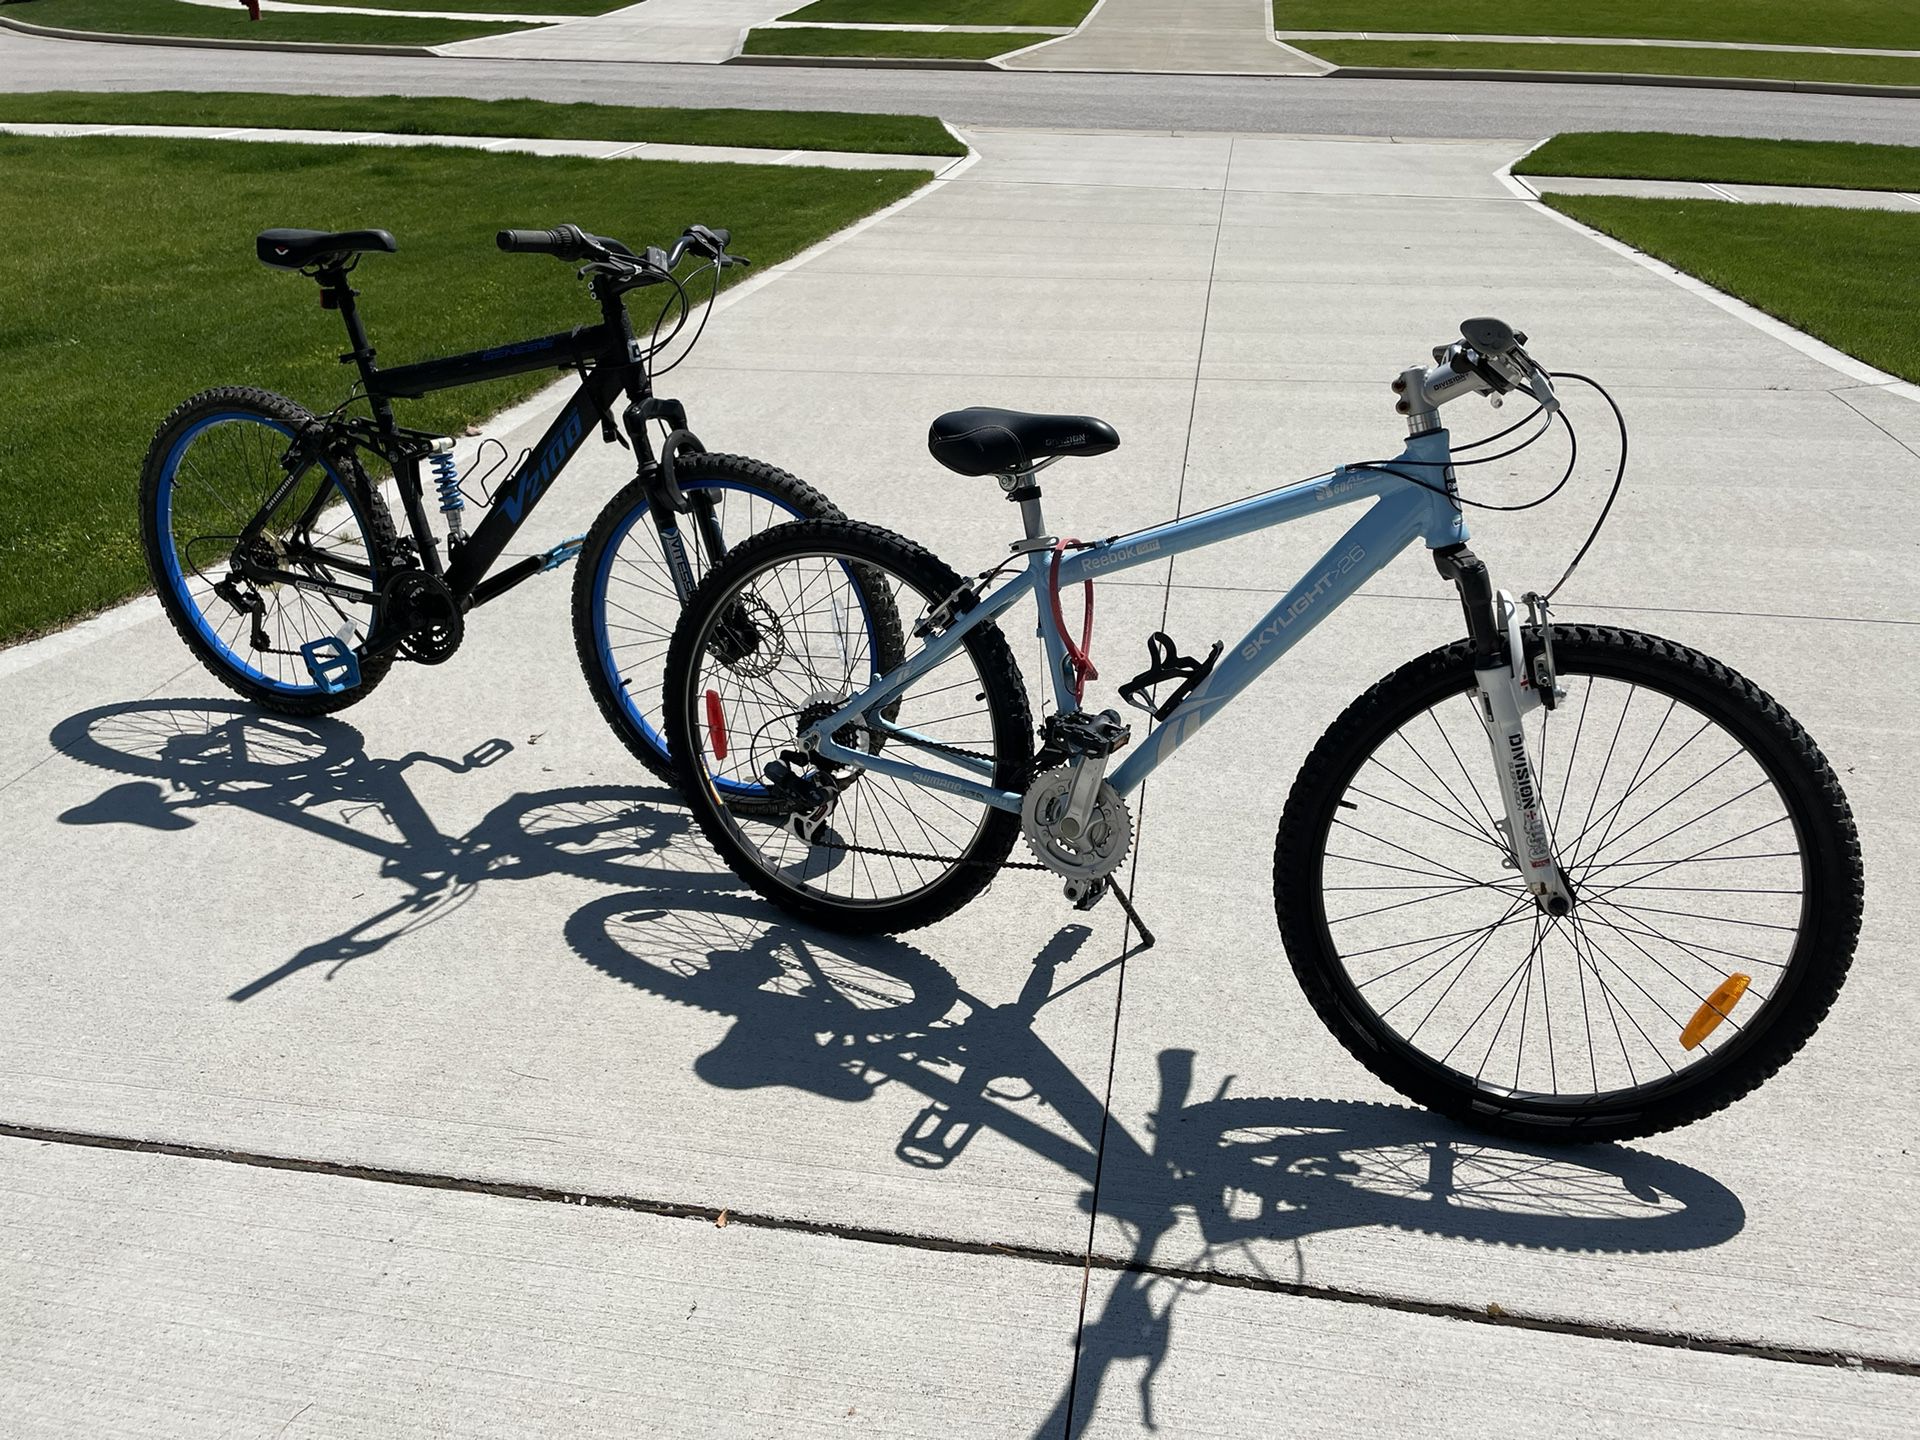 FREE Two Adult bikes